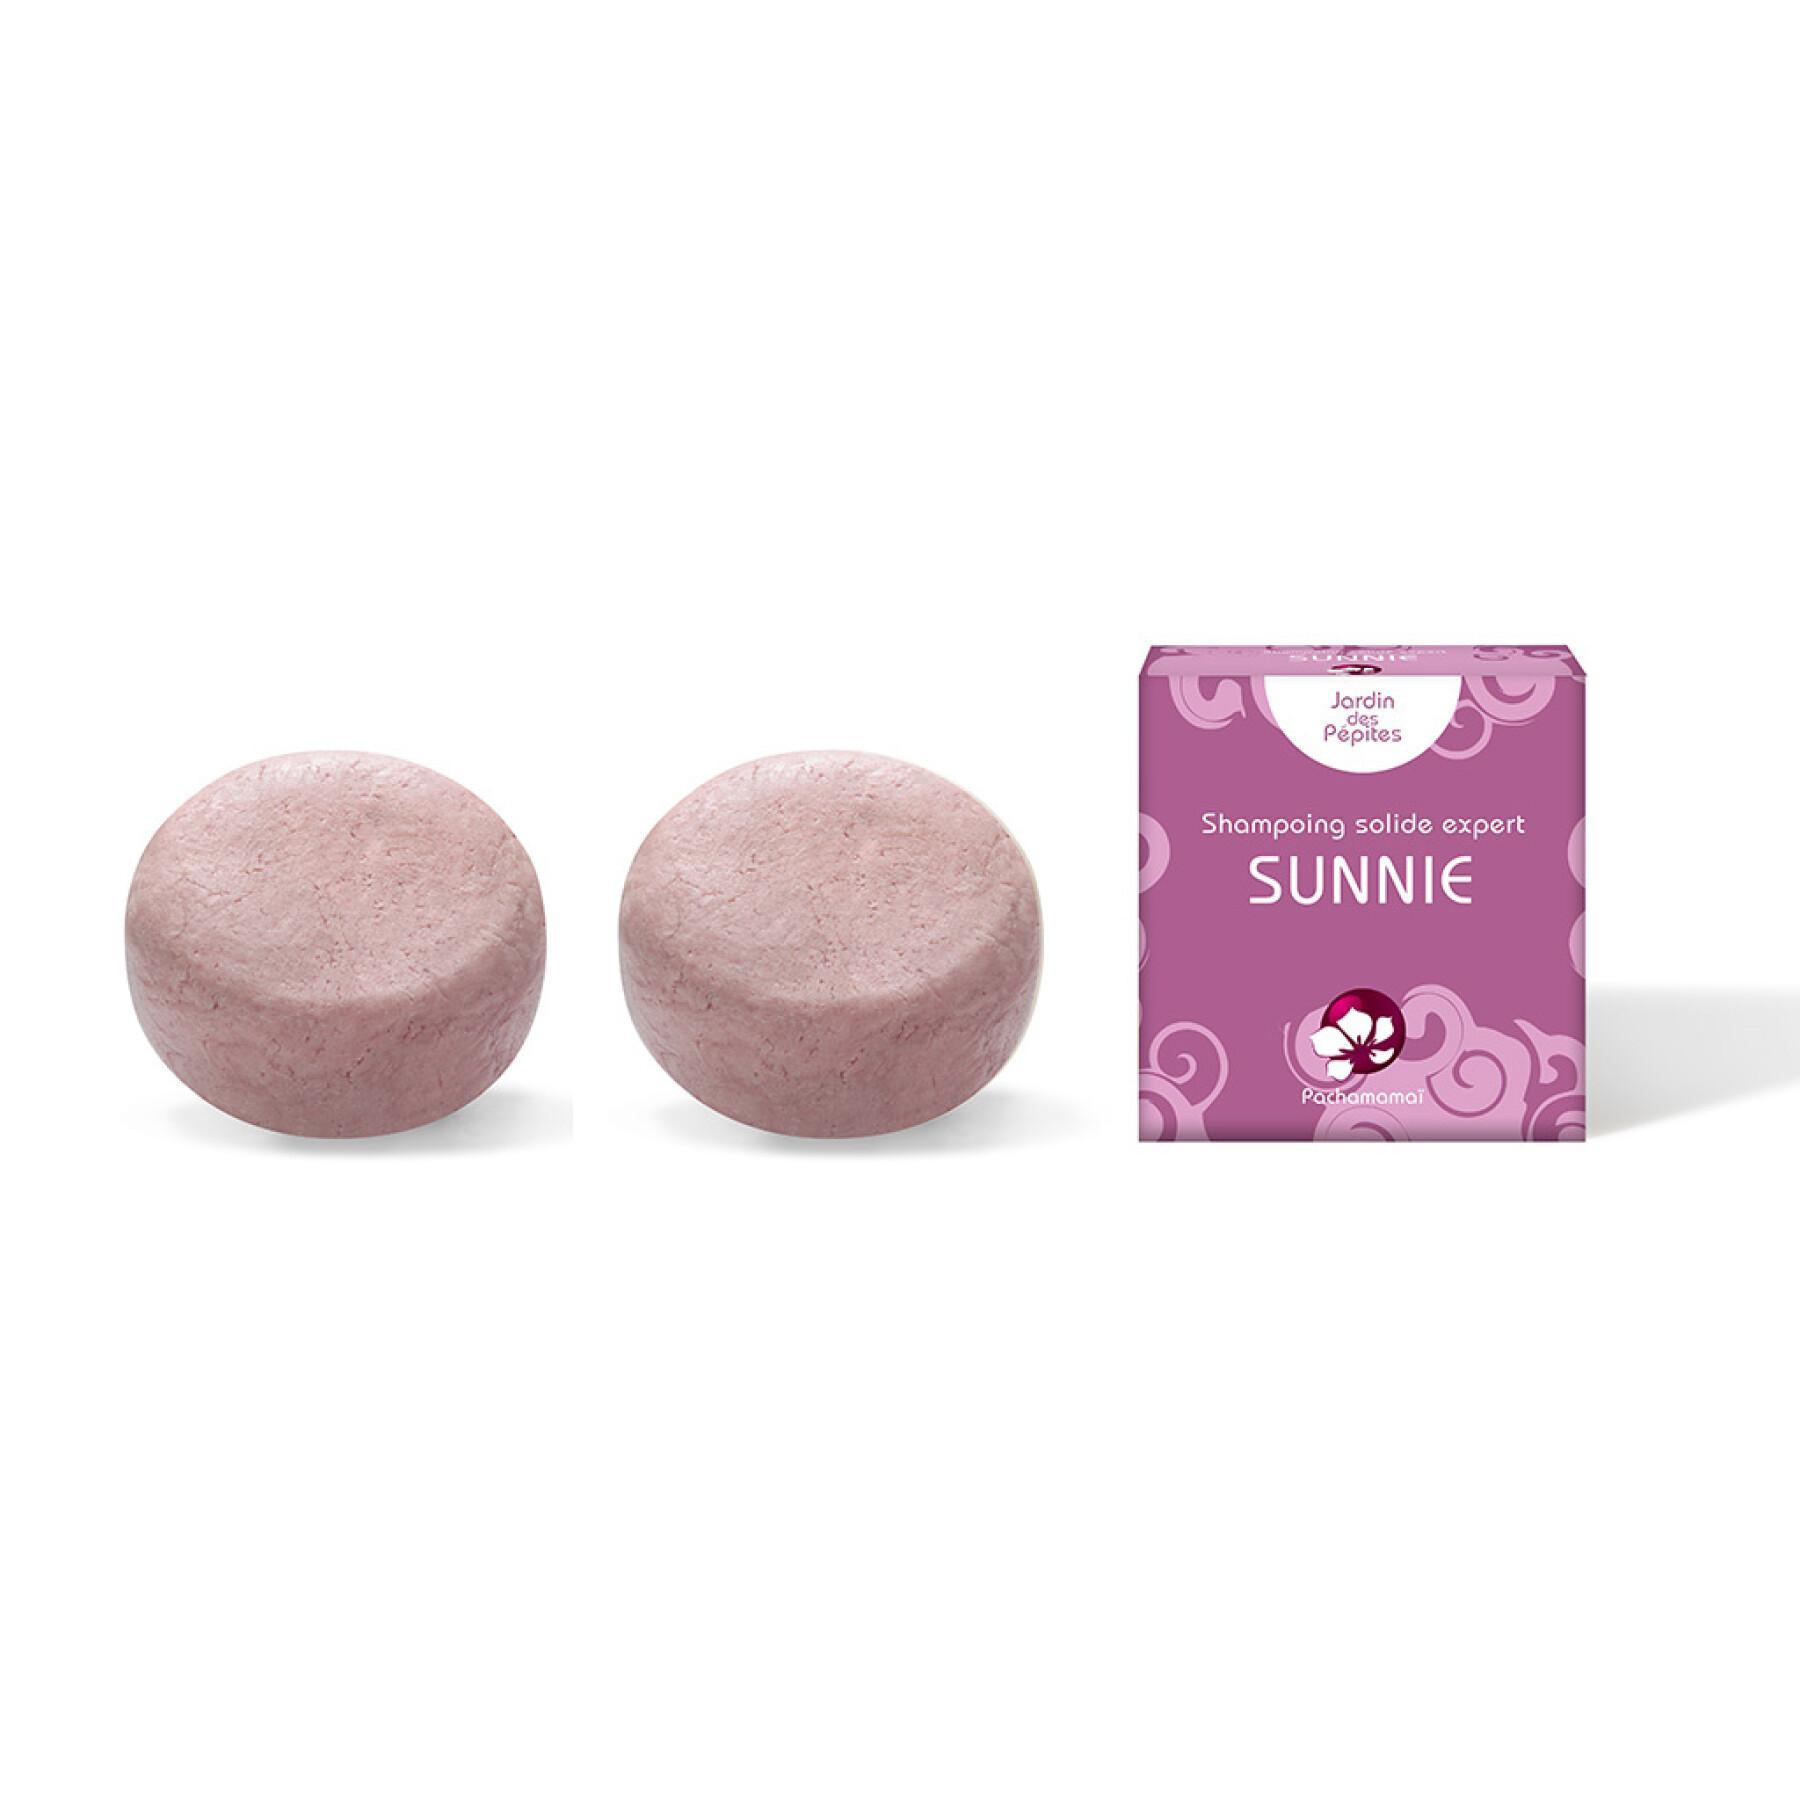 Solid shampoo travel size refill by 2 Pachamamaï Sunnie